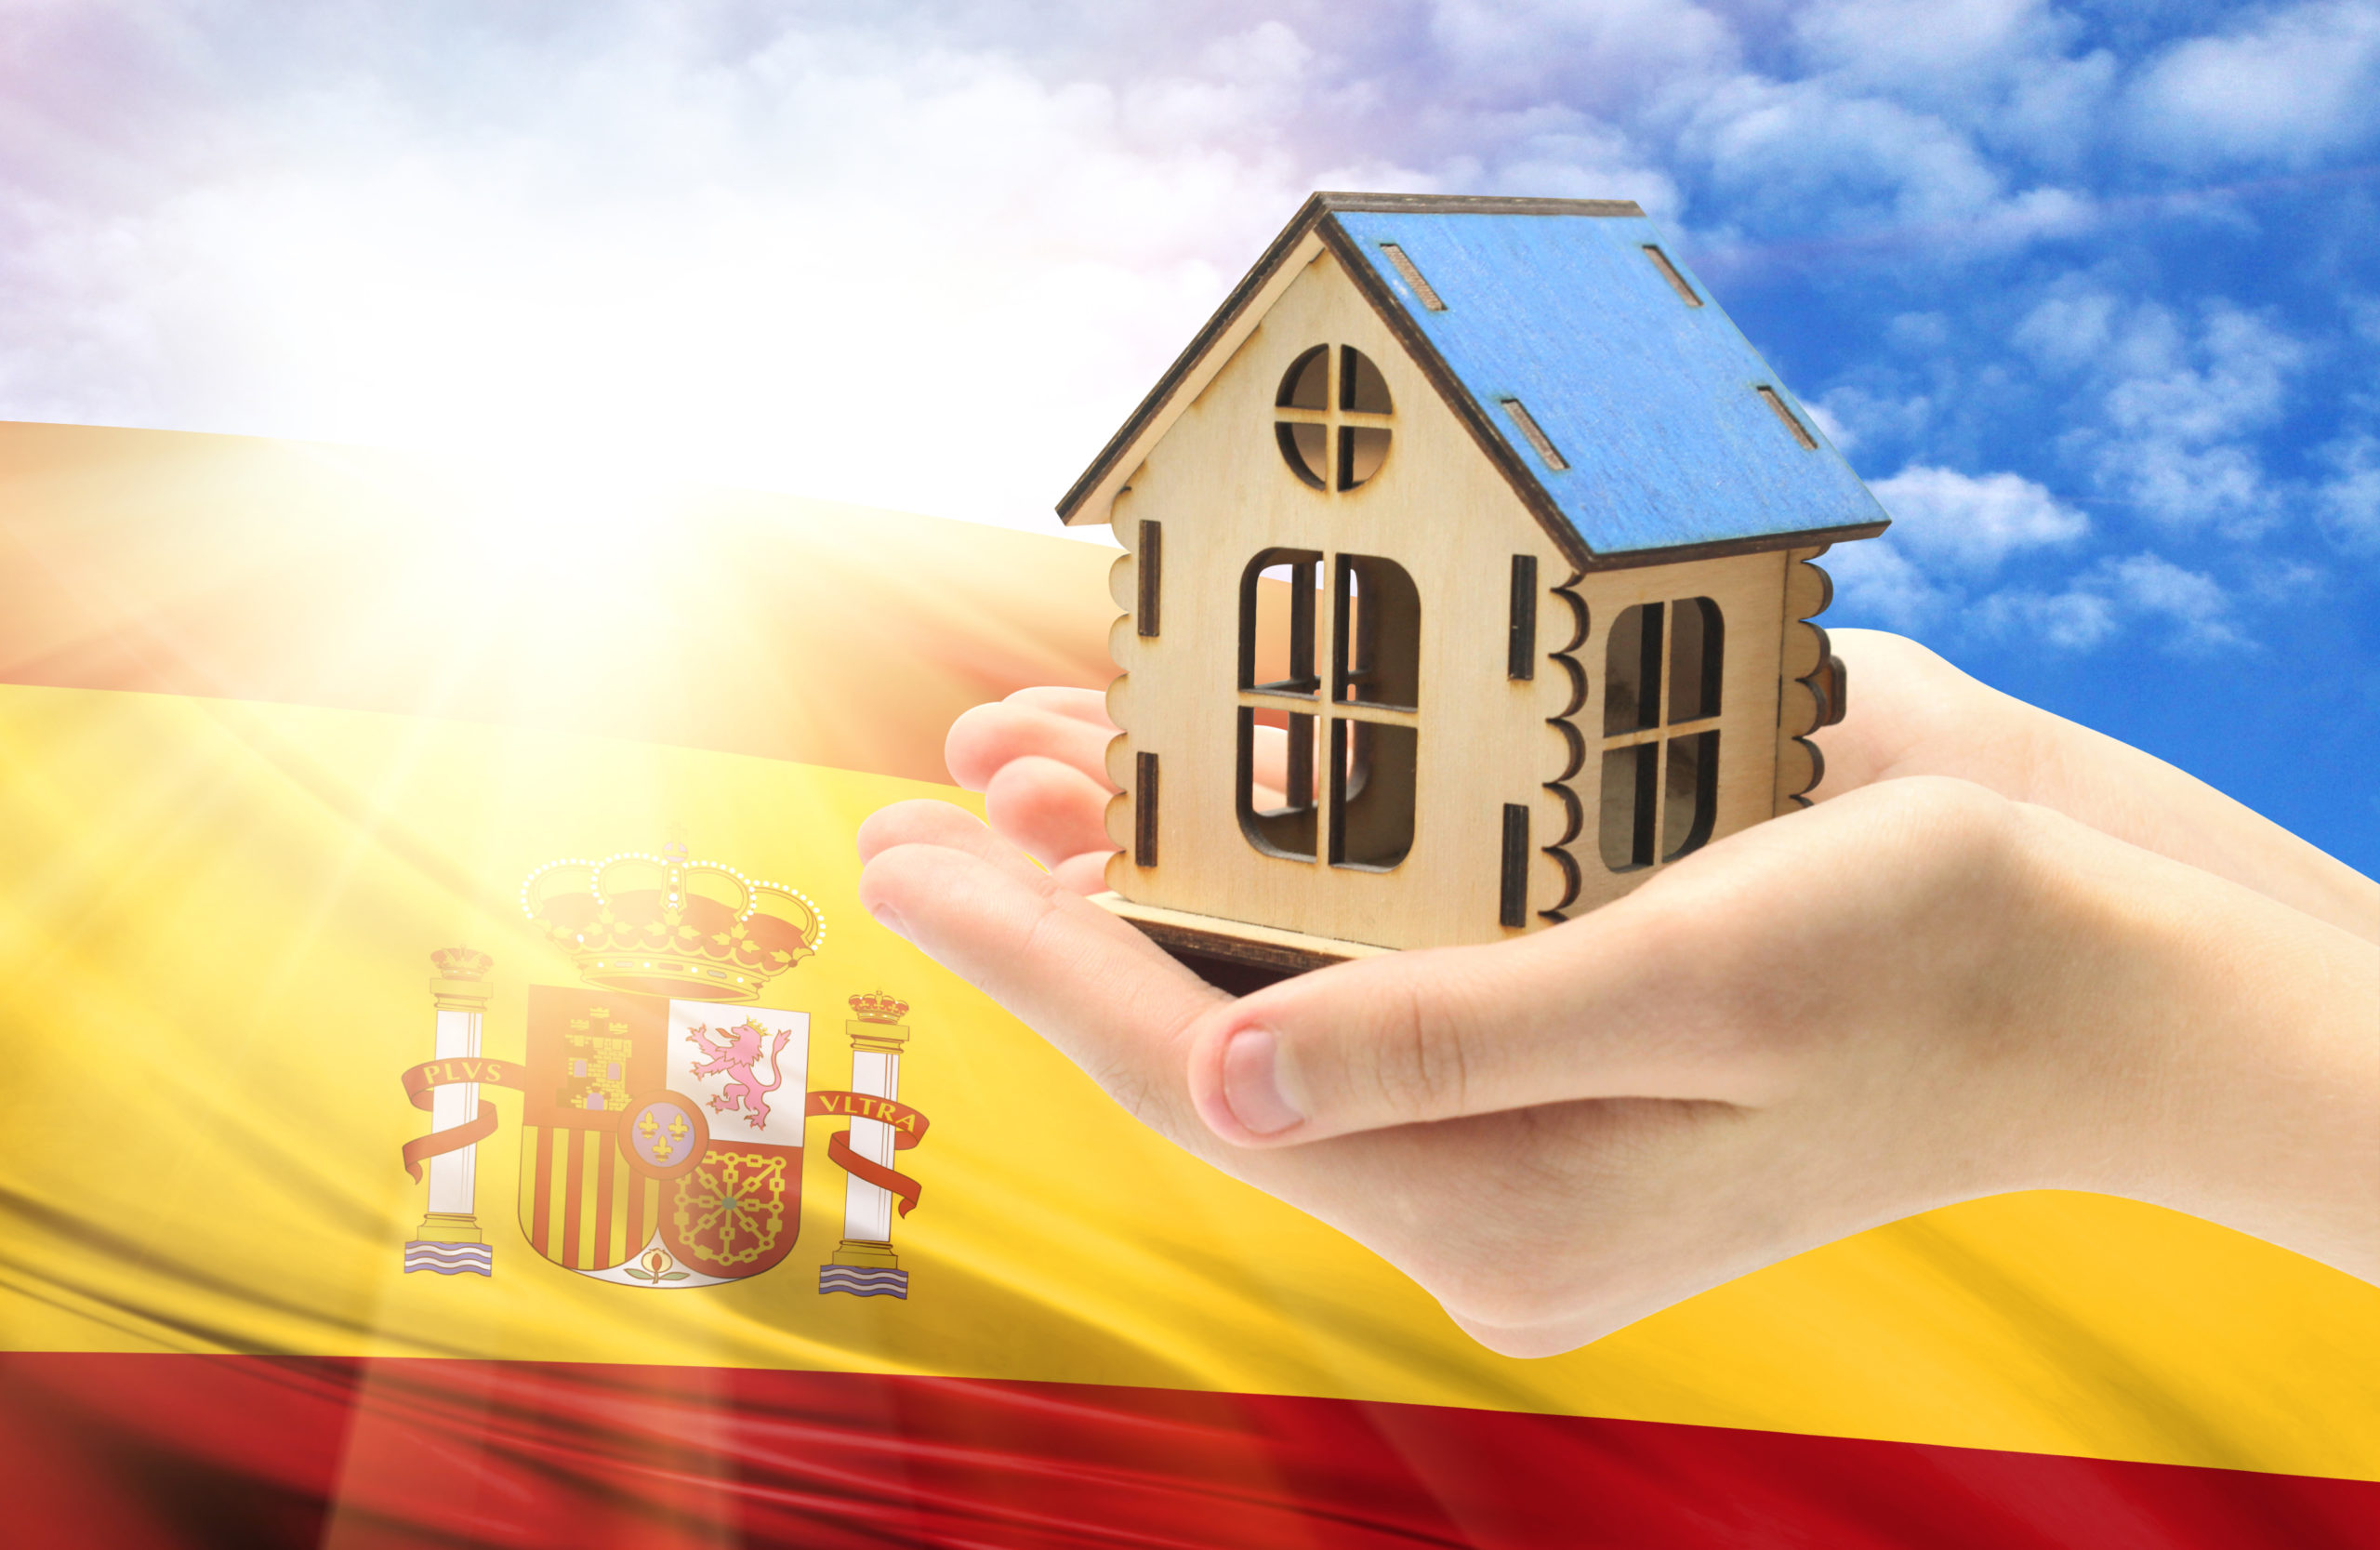 Image - moving to Spain: Millenius/shutterstock 